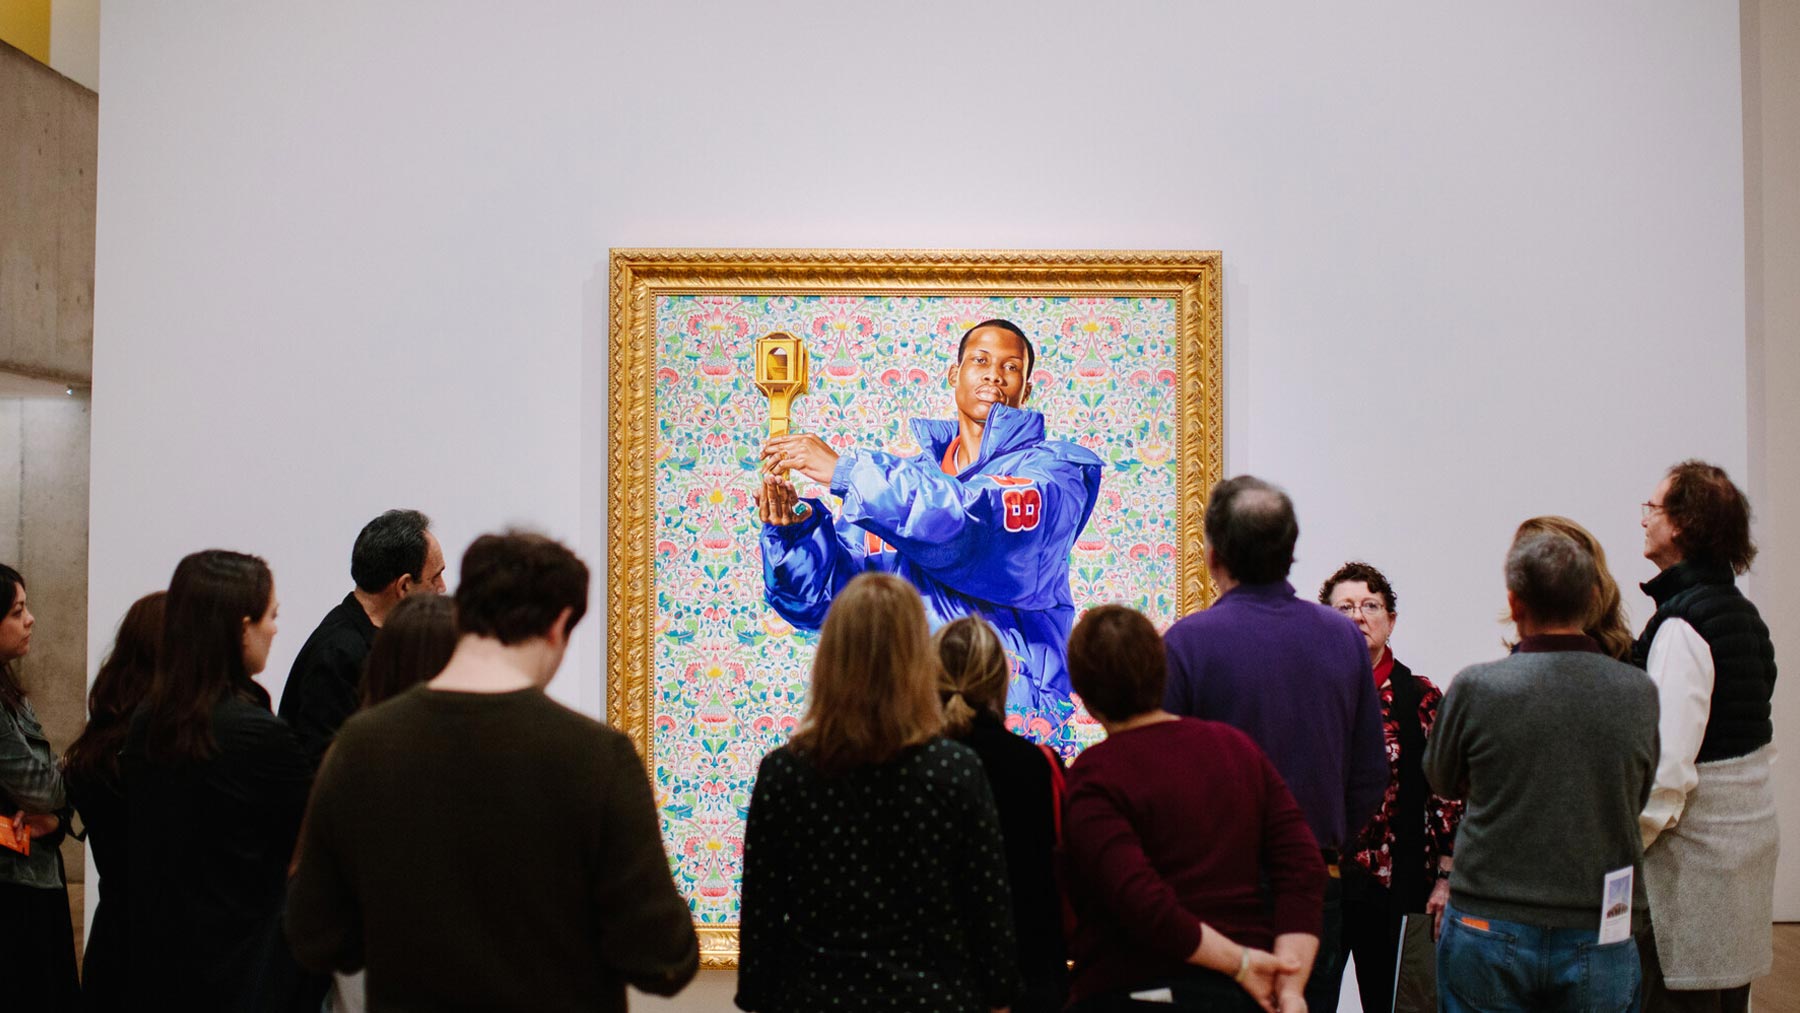 Small tour group in front of St. Dionysus by Kehinde Wiley